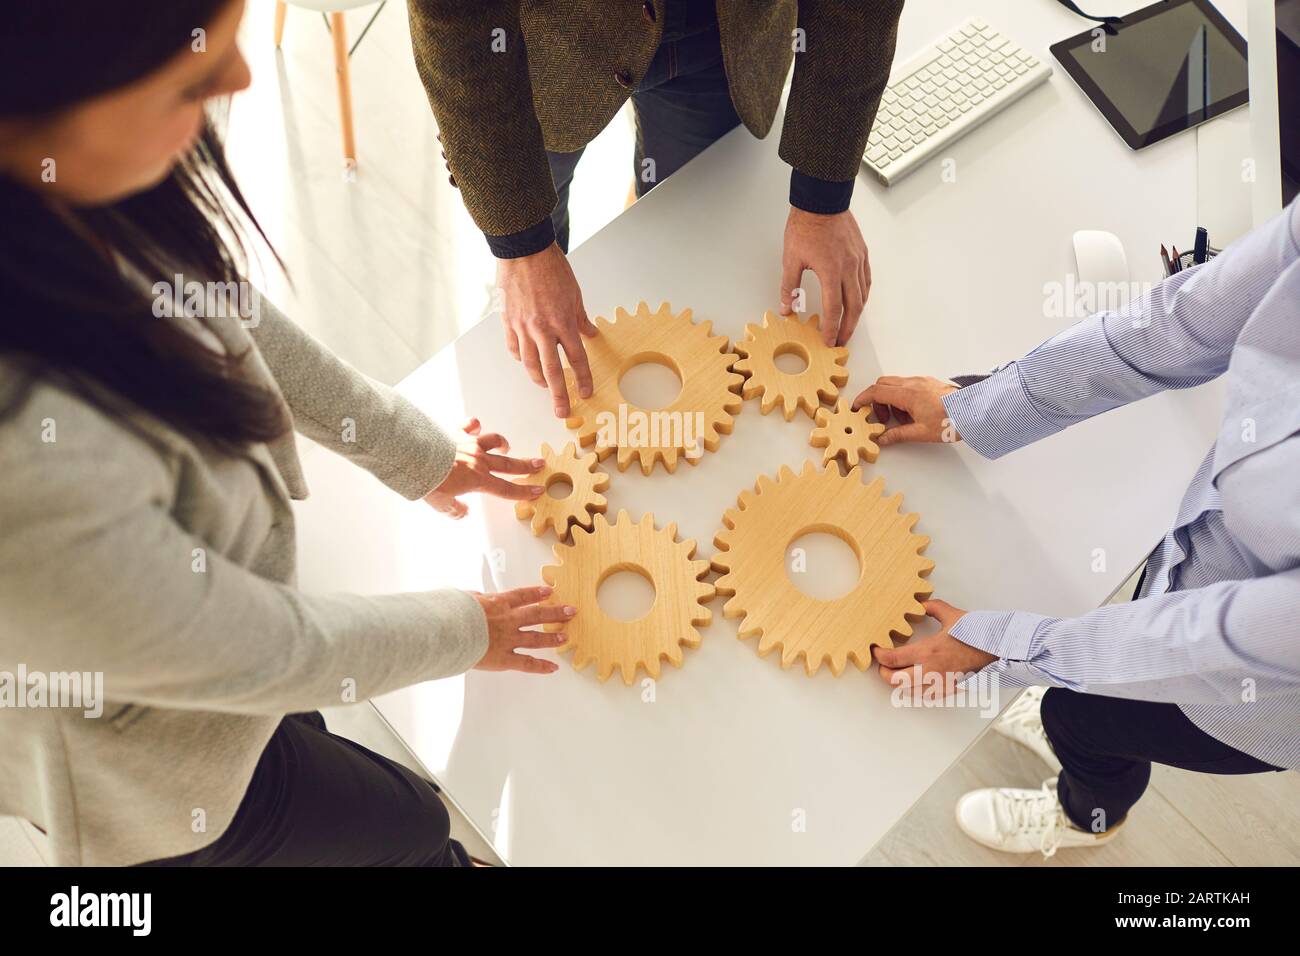 A group of business people holds wooden wheels with teeth in their hands on an office white table. Stock Photo